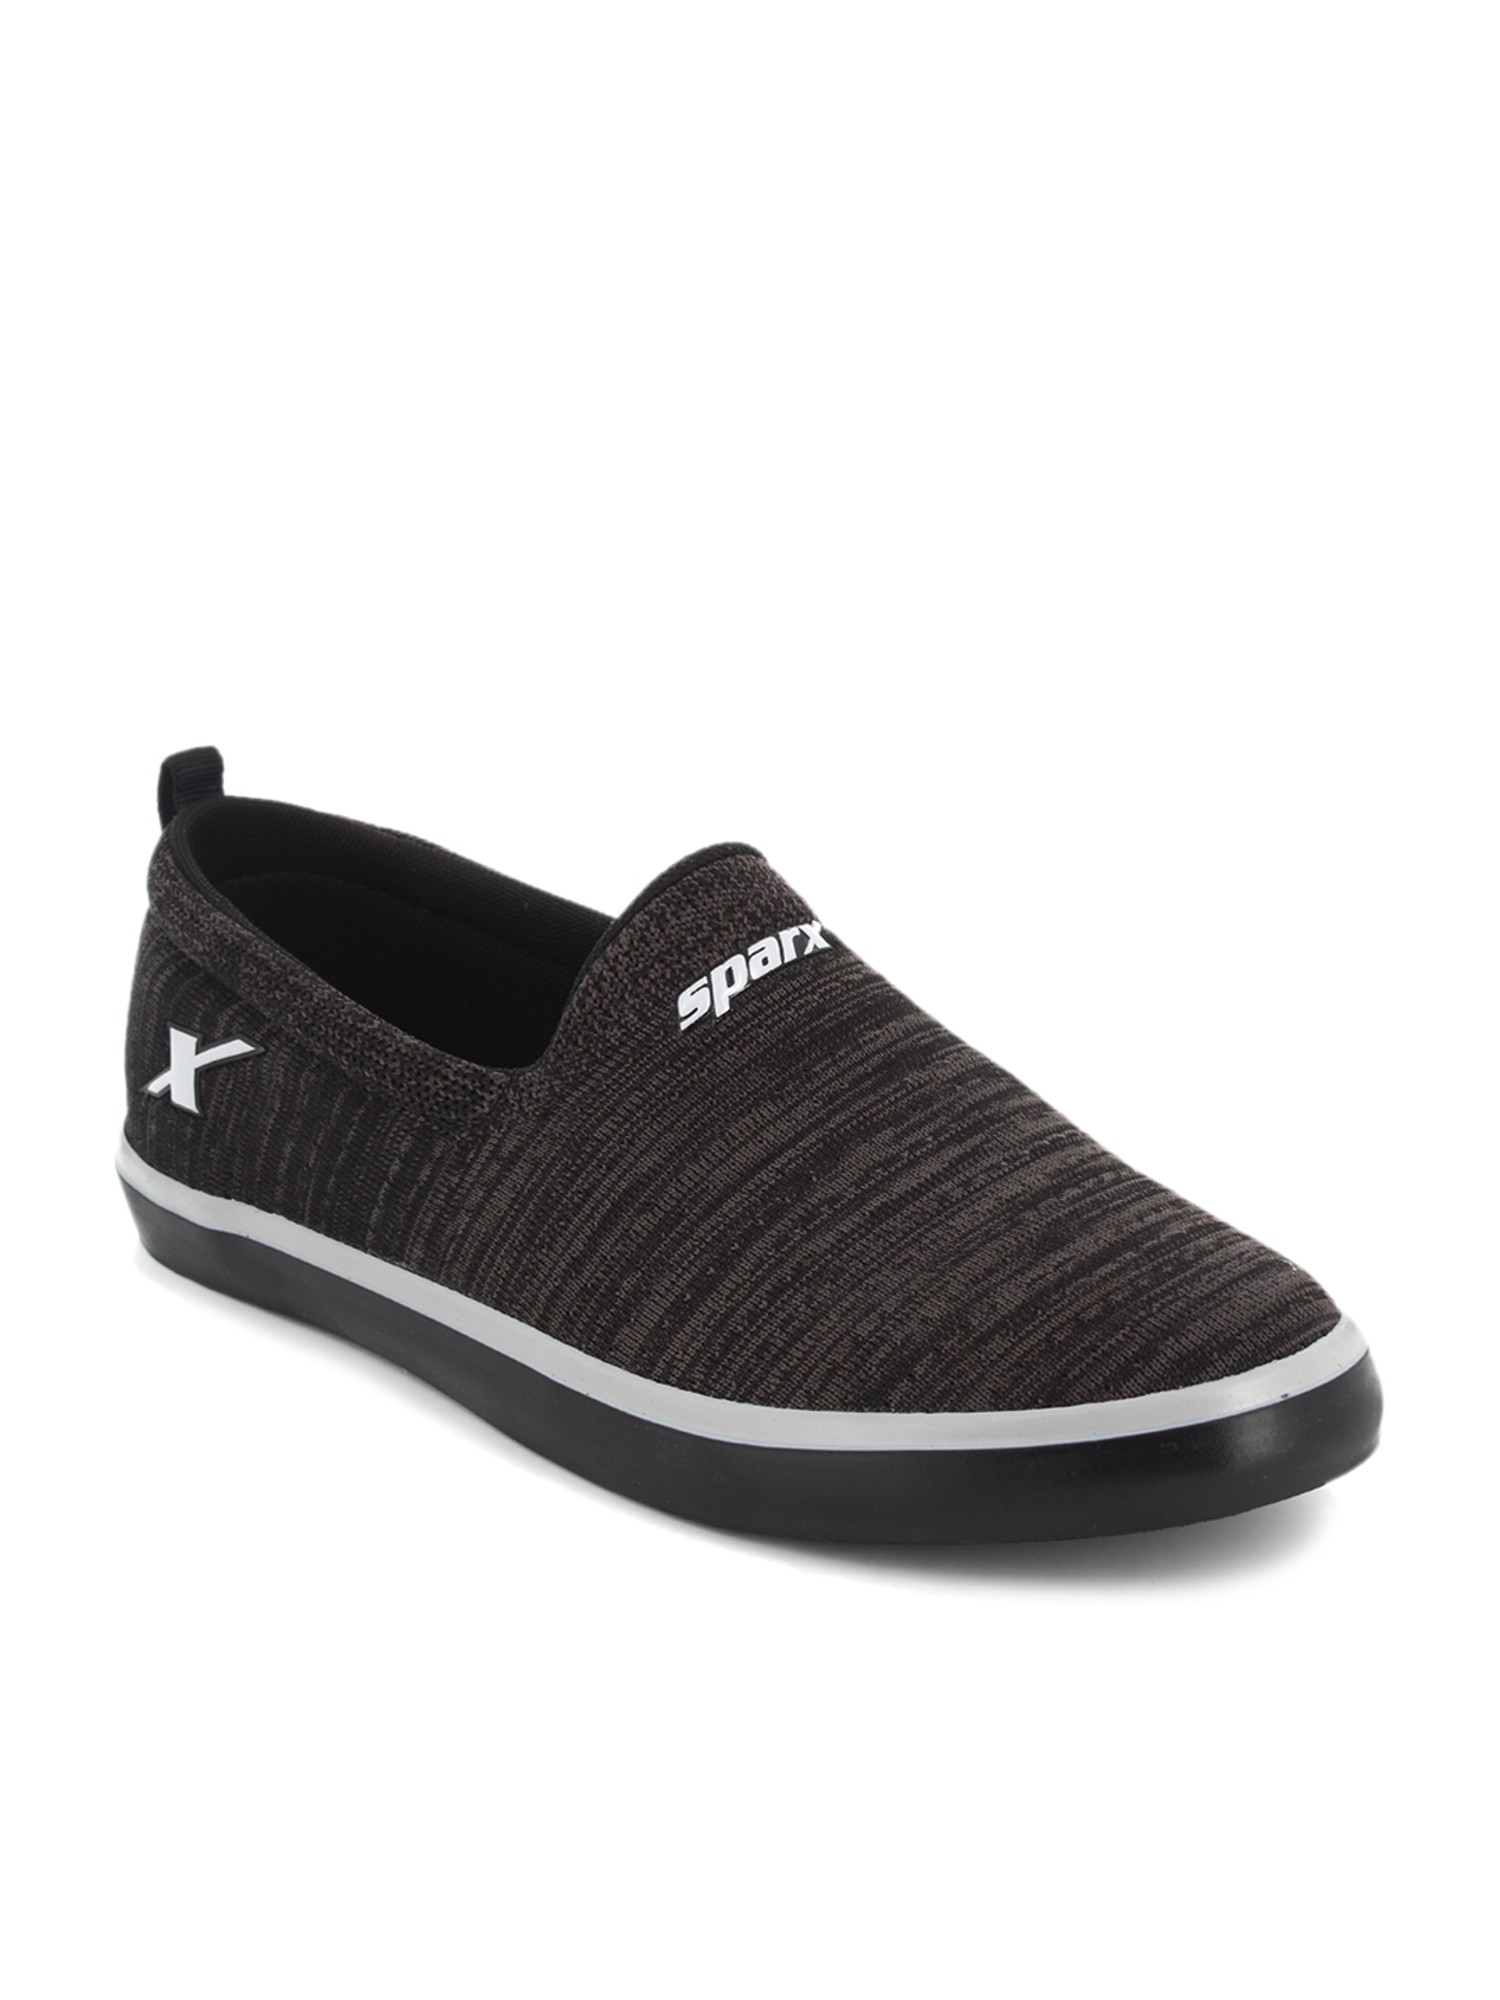 Sparx SM-633 Black Casual Slip-Ons from 